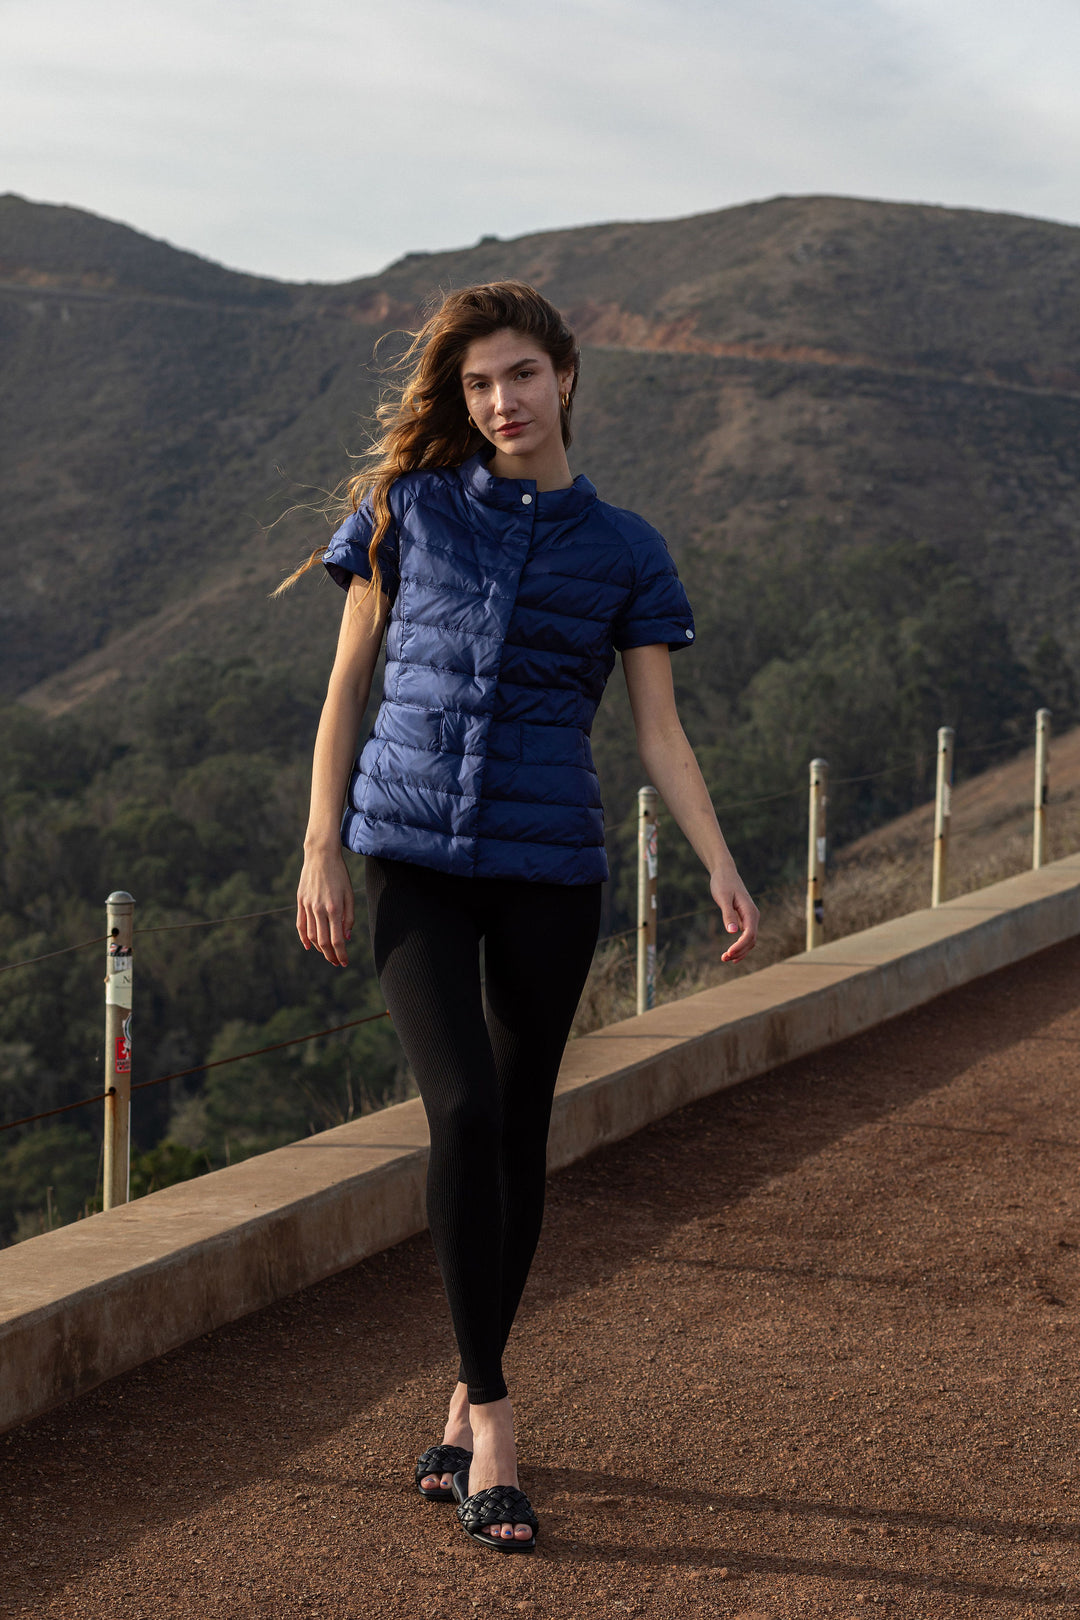 Tahoe Quilted Short Sleeve Jacket